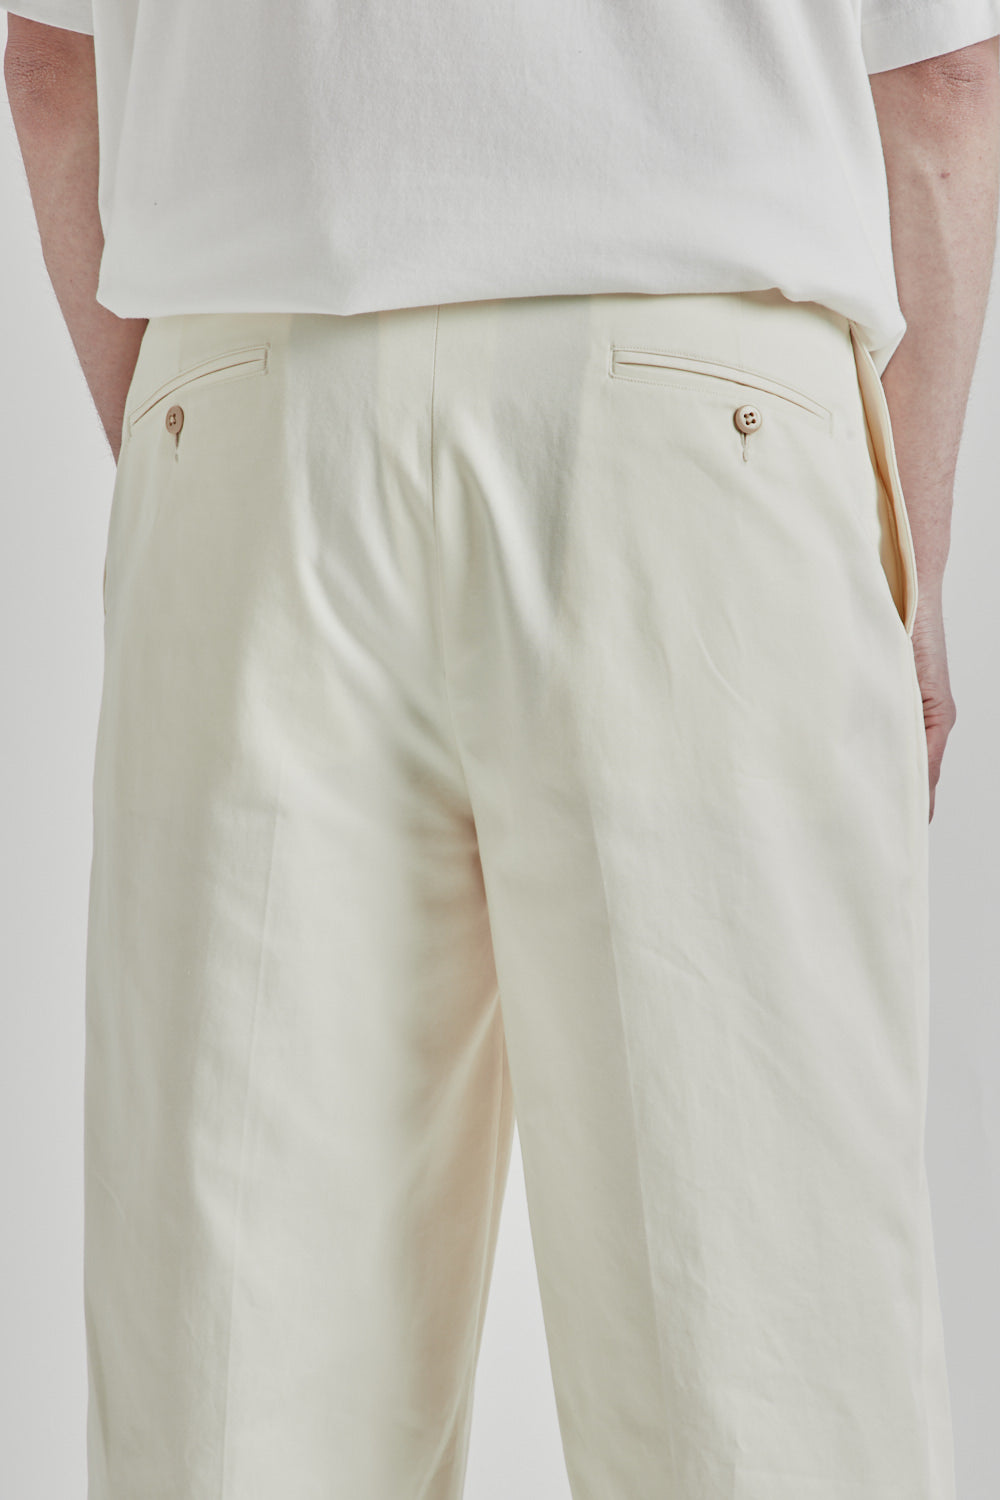 Blurhms 2046D Chino Pants in Ivory